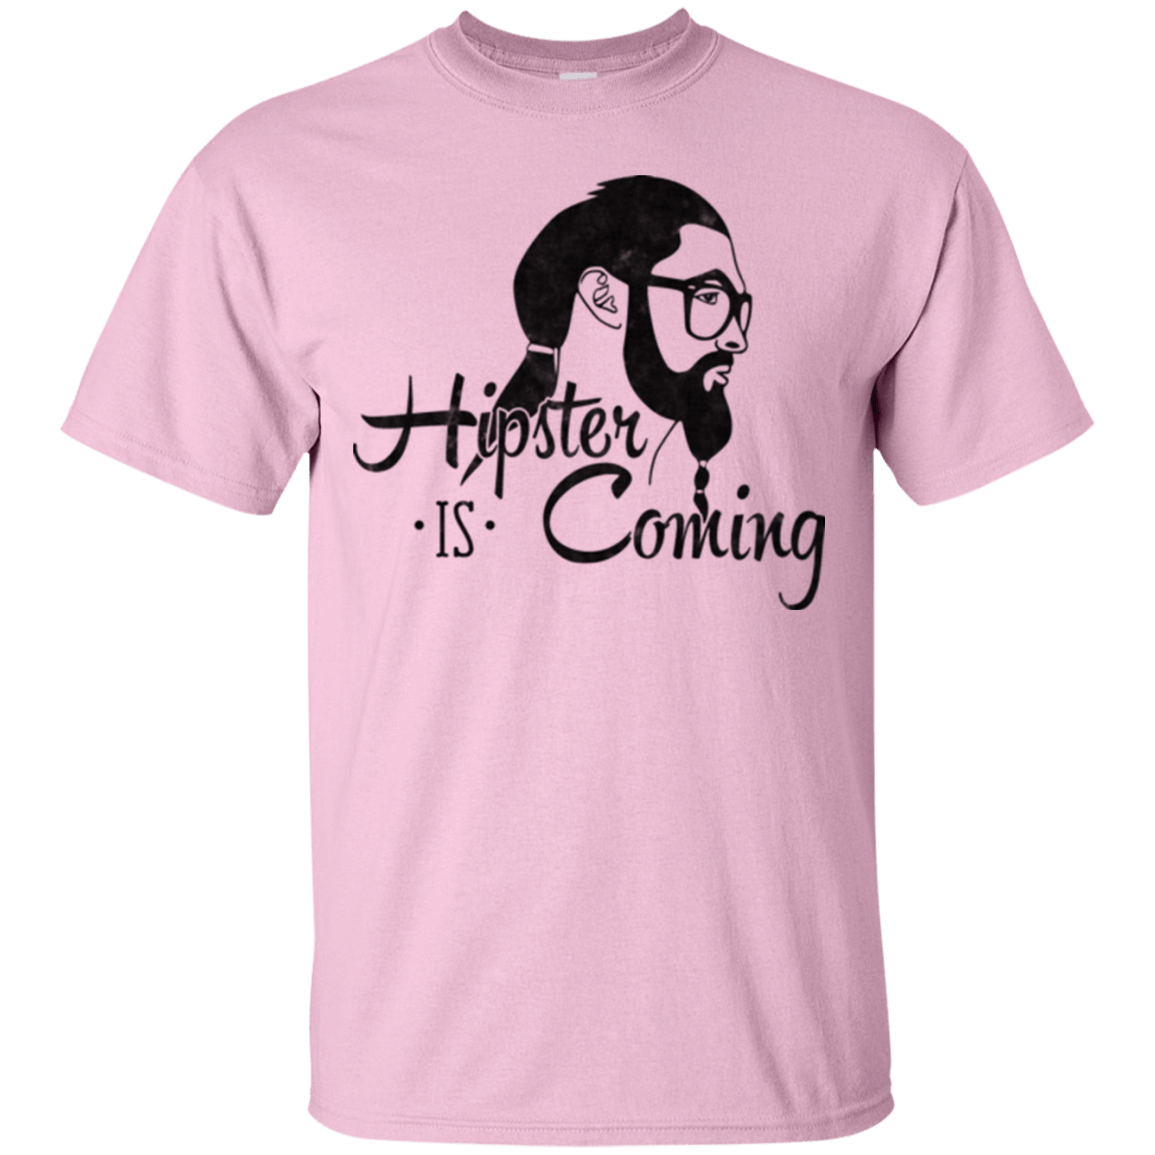 T-Shirts Light Pink / Small Hipster is Coming T-Shirt